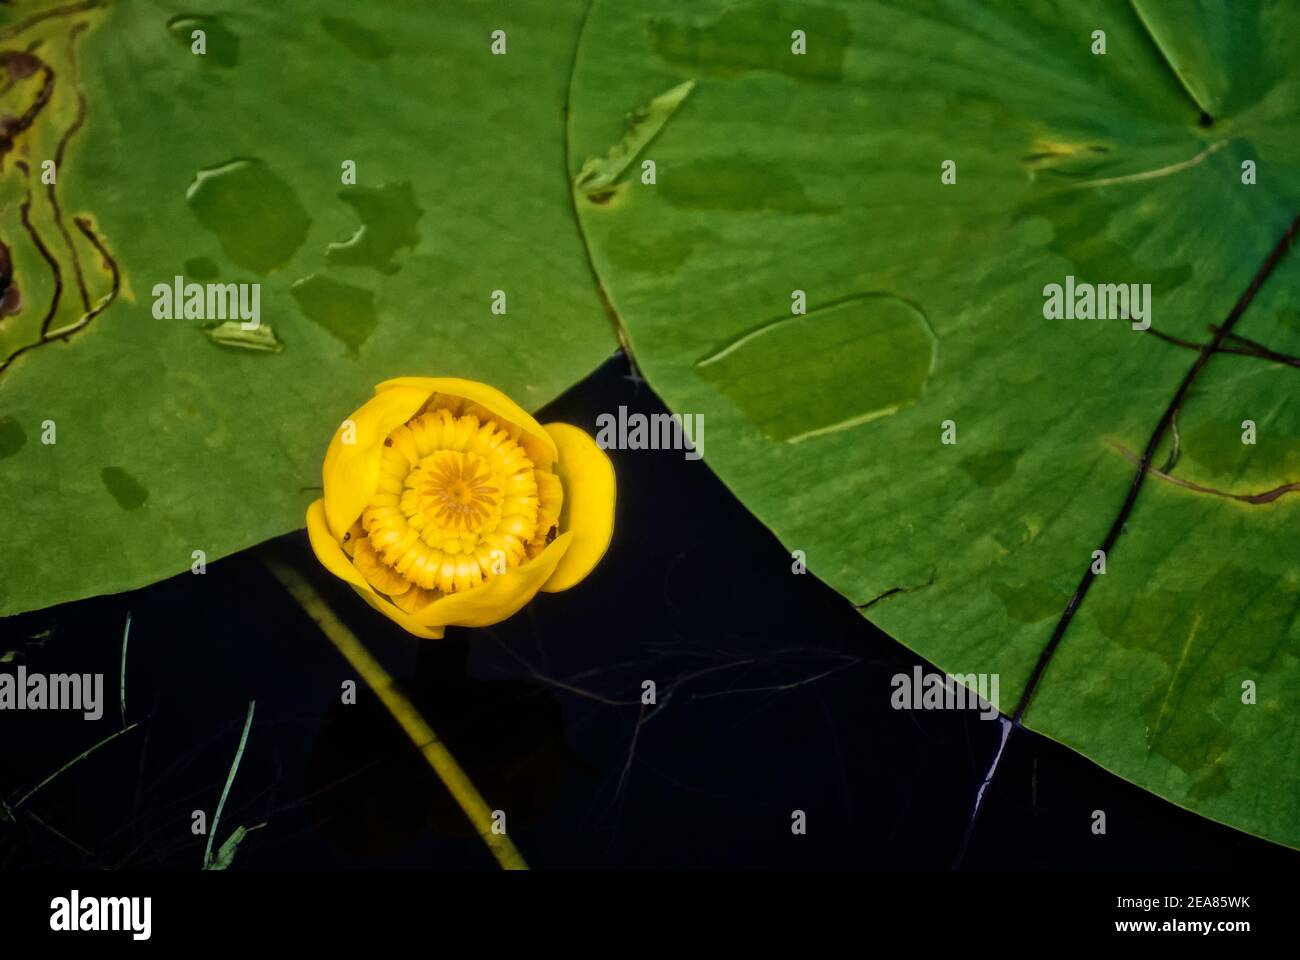 Water Lilly Stock Photo